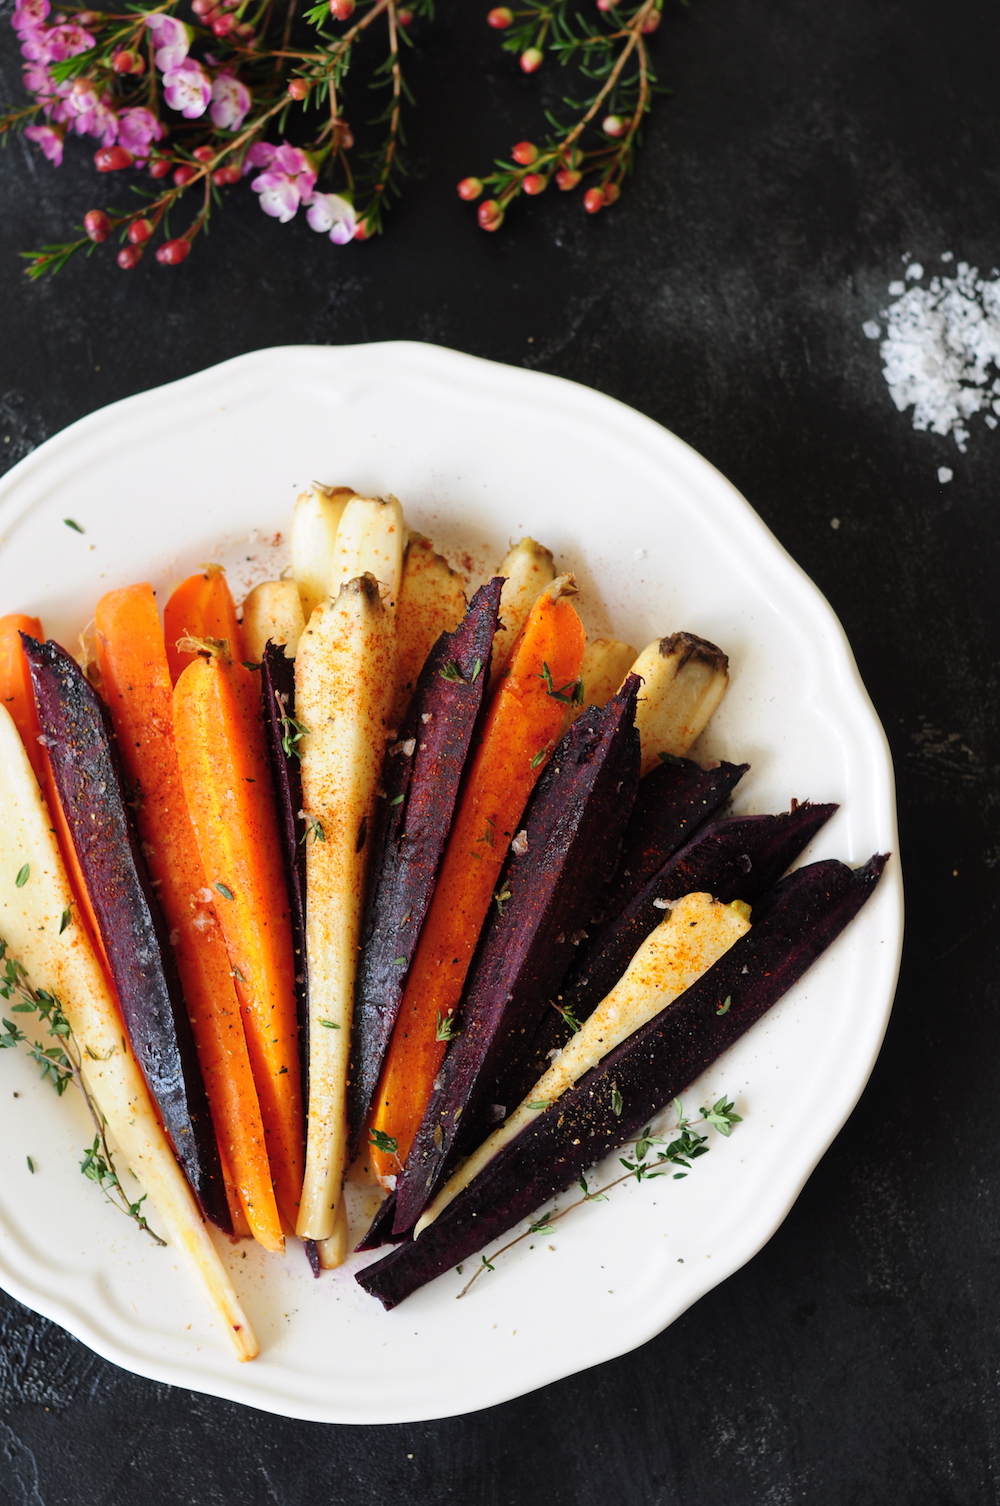 Sous vide carrots cooked in butter, honey and infused with fresh thyme, then boldly finished with smoked paprika, ground cumin, and freshly ground black pepper.